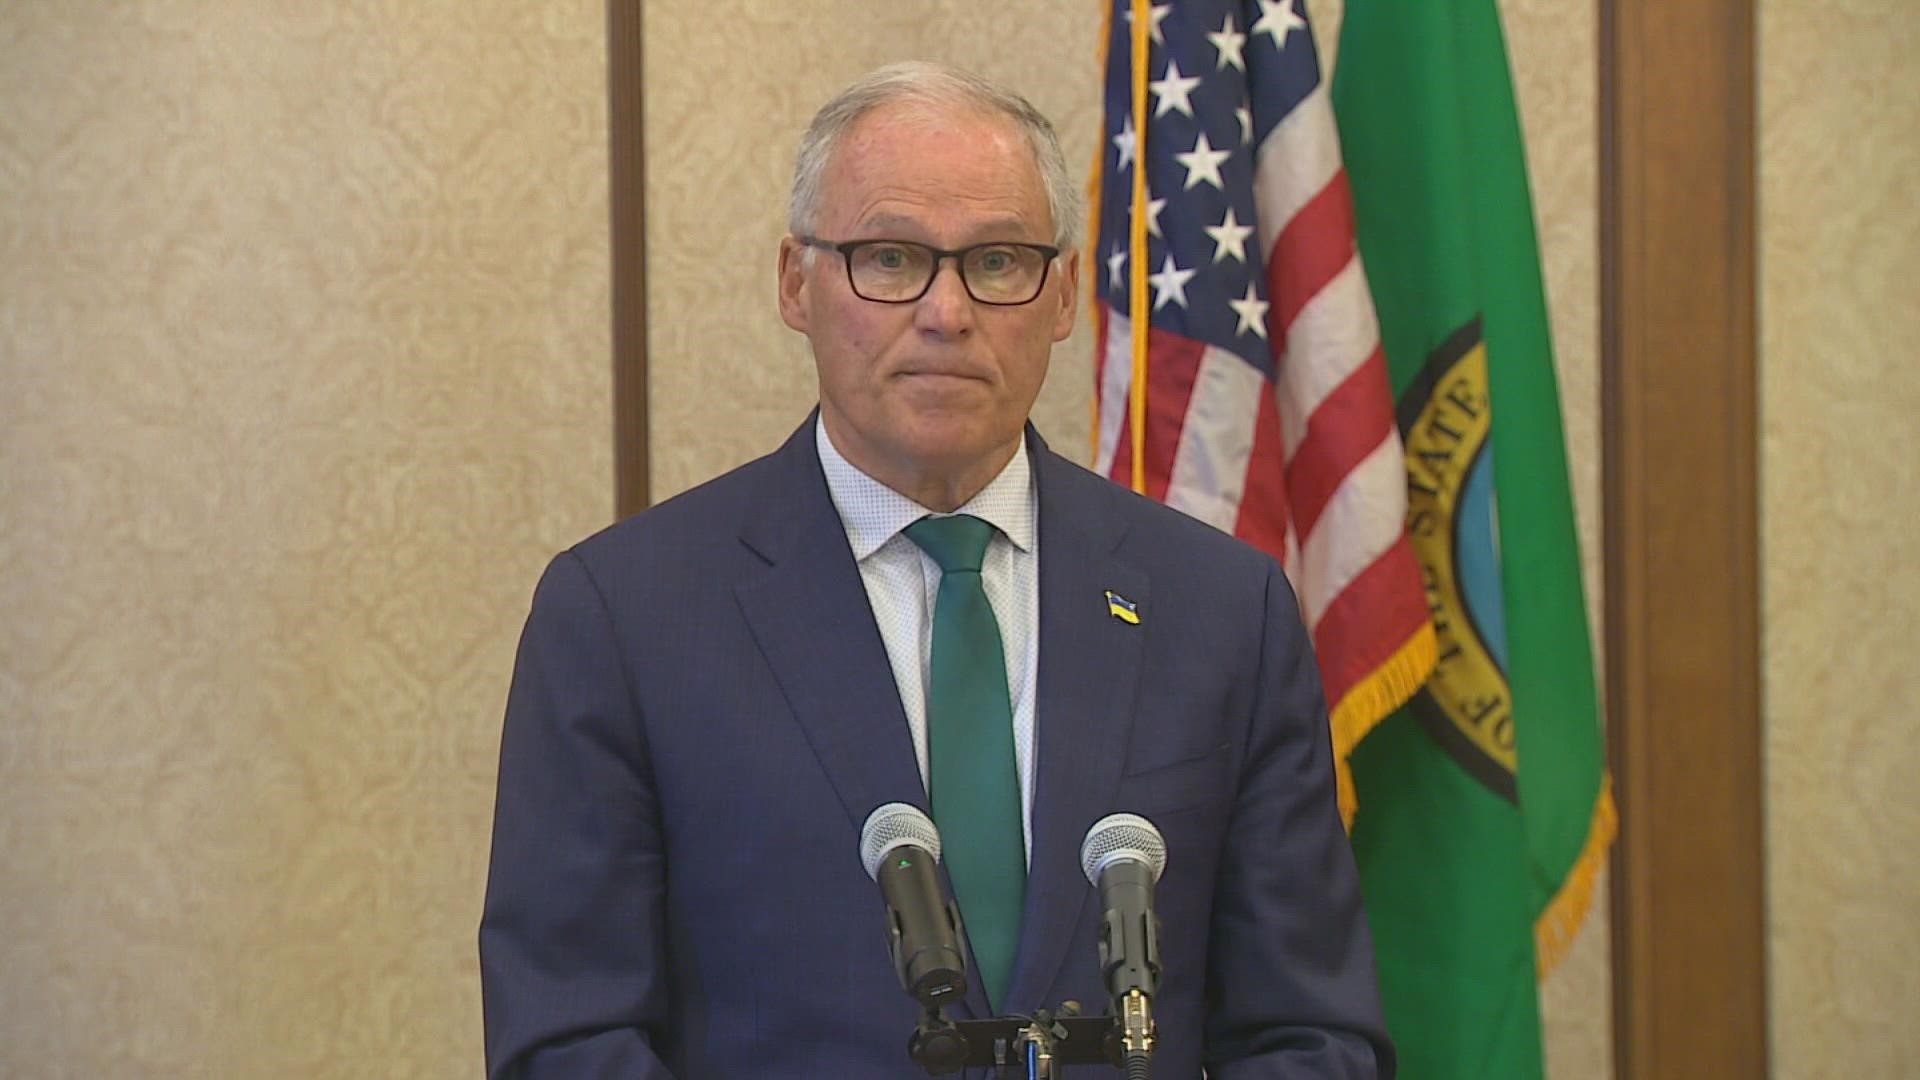 In a wide-ranging press conference on Wednesday, Inslee said vaccination requirements for state employees will remain in place.